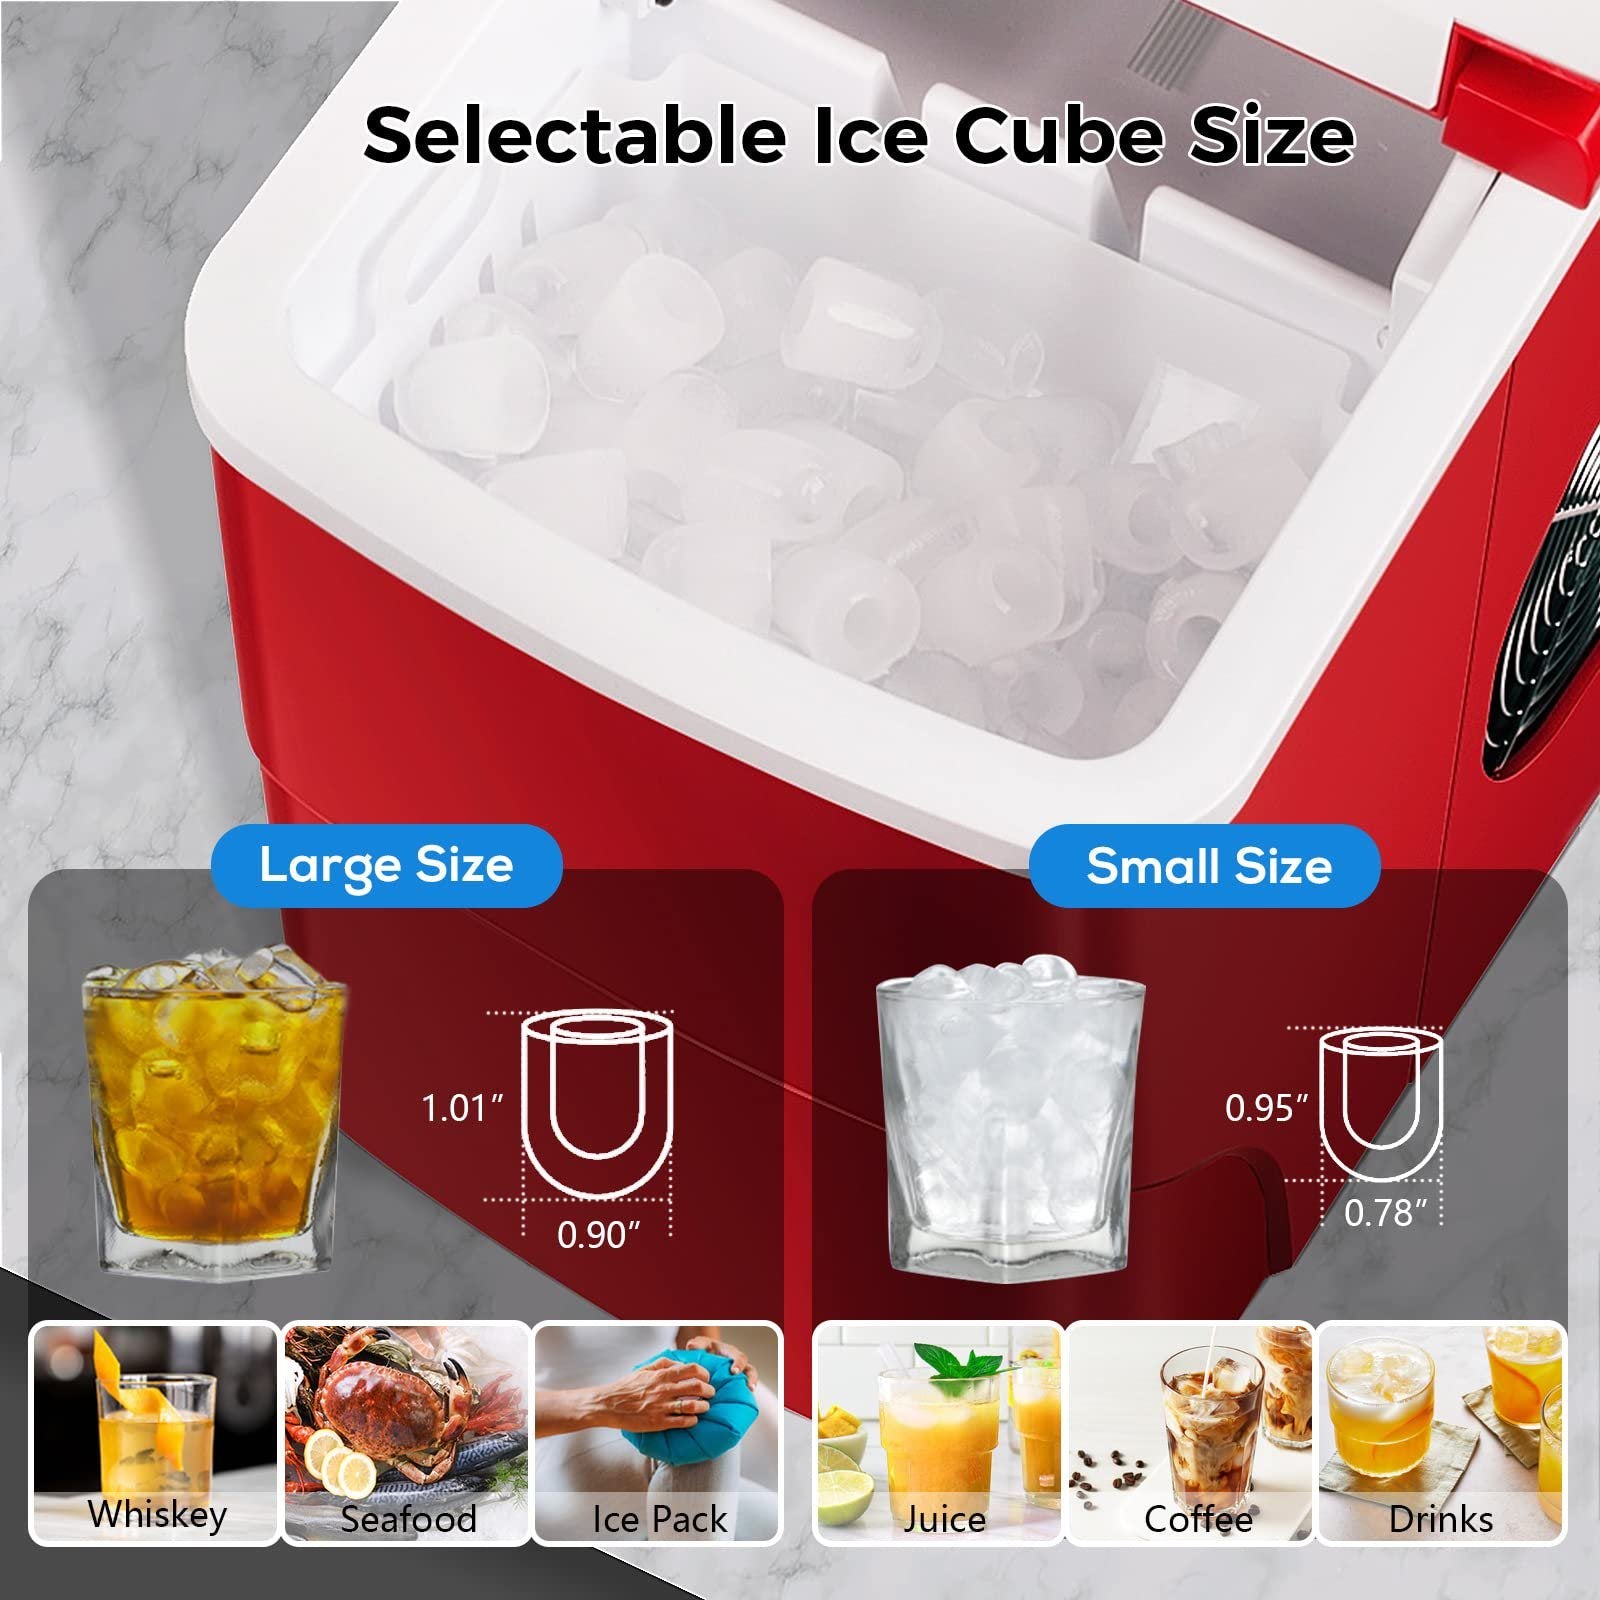 A portable Compact Ice Maker with a viewing window on the lid, displaying ice cubes inside, accompanied by a scoop resting beside it.